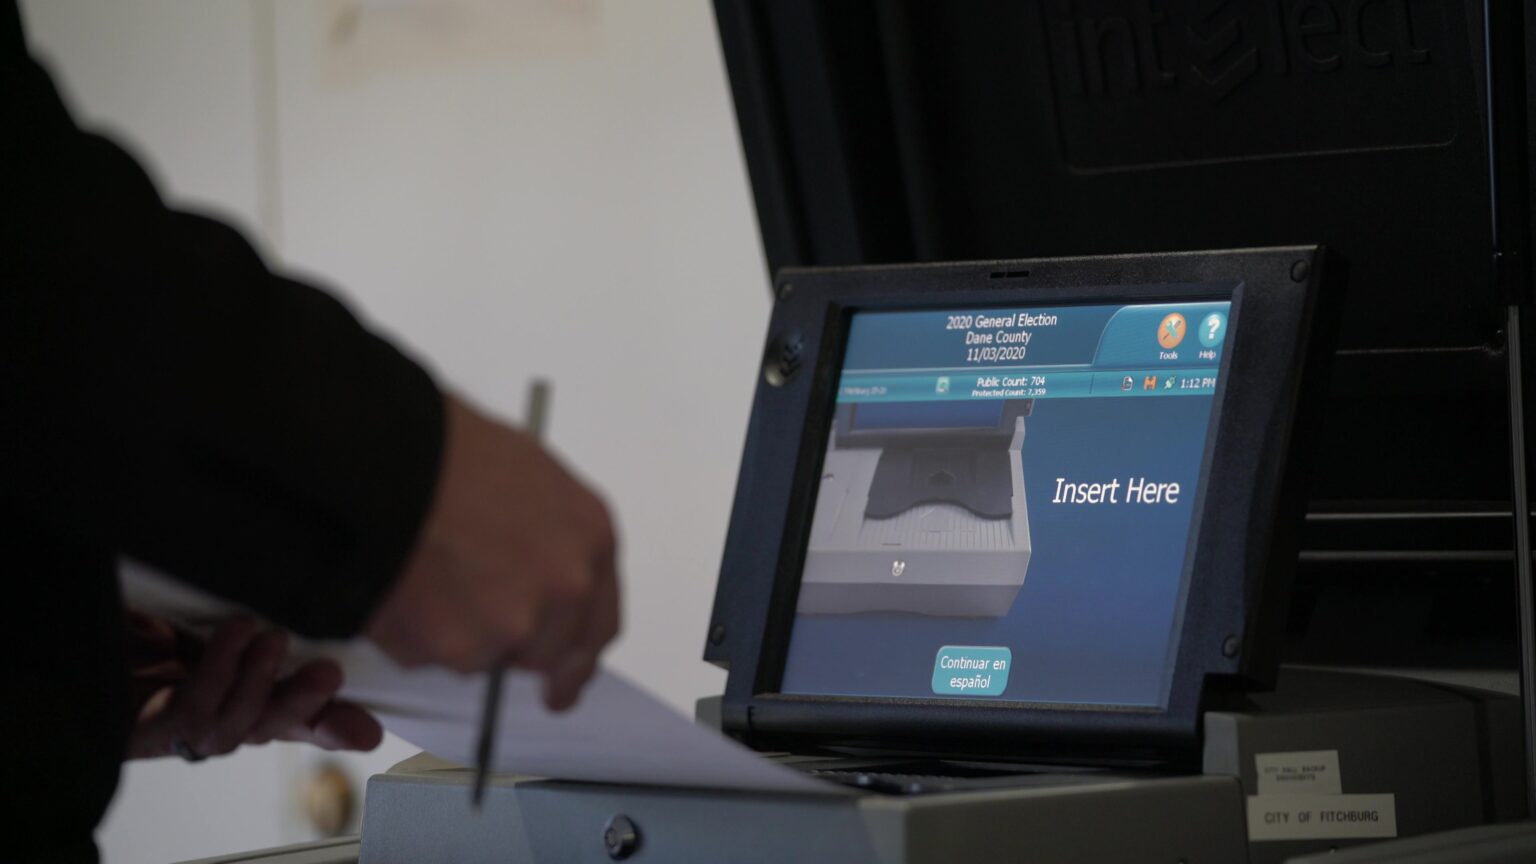 A voter places a ballot into a voting scanner and tabulation machine with a screen that shows the insertion tray with the words Insert Here.